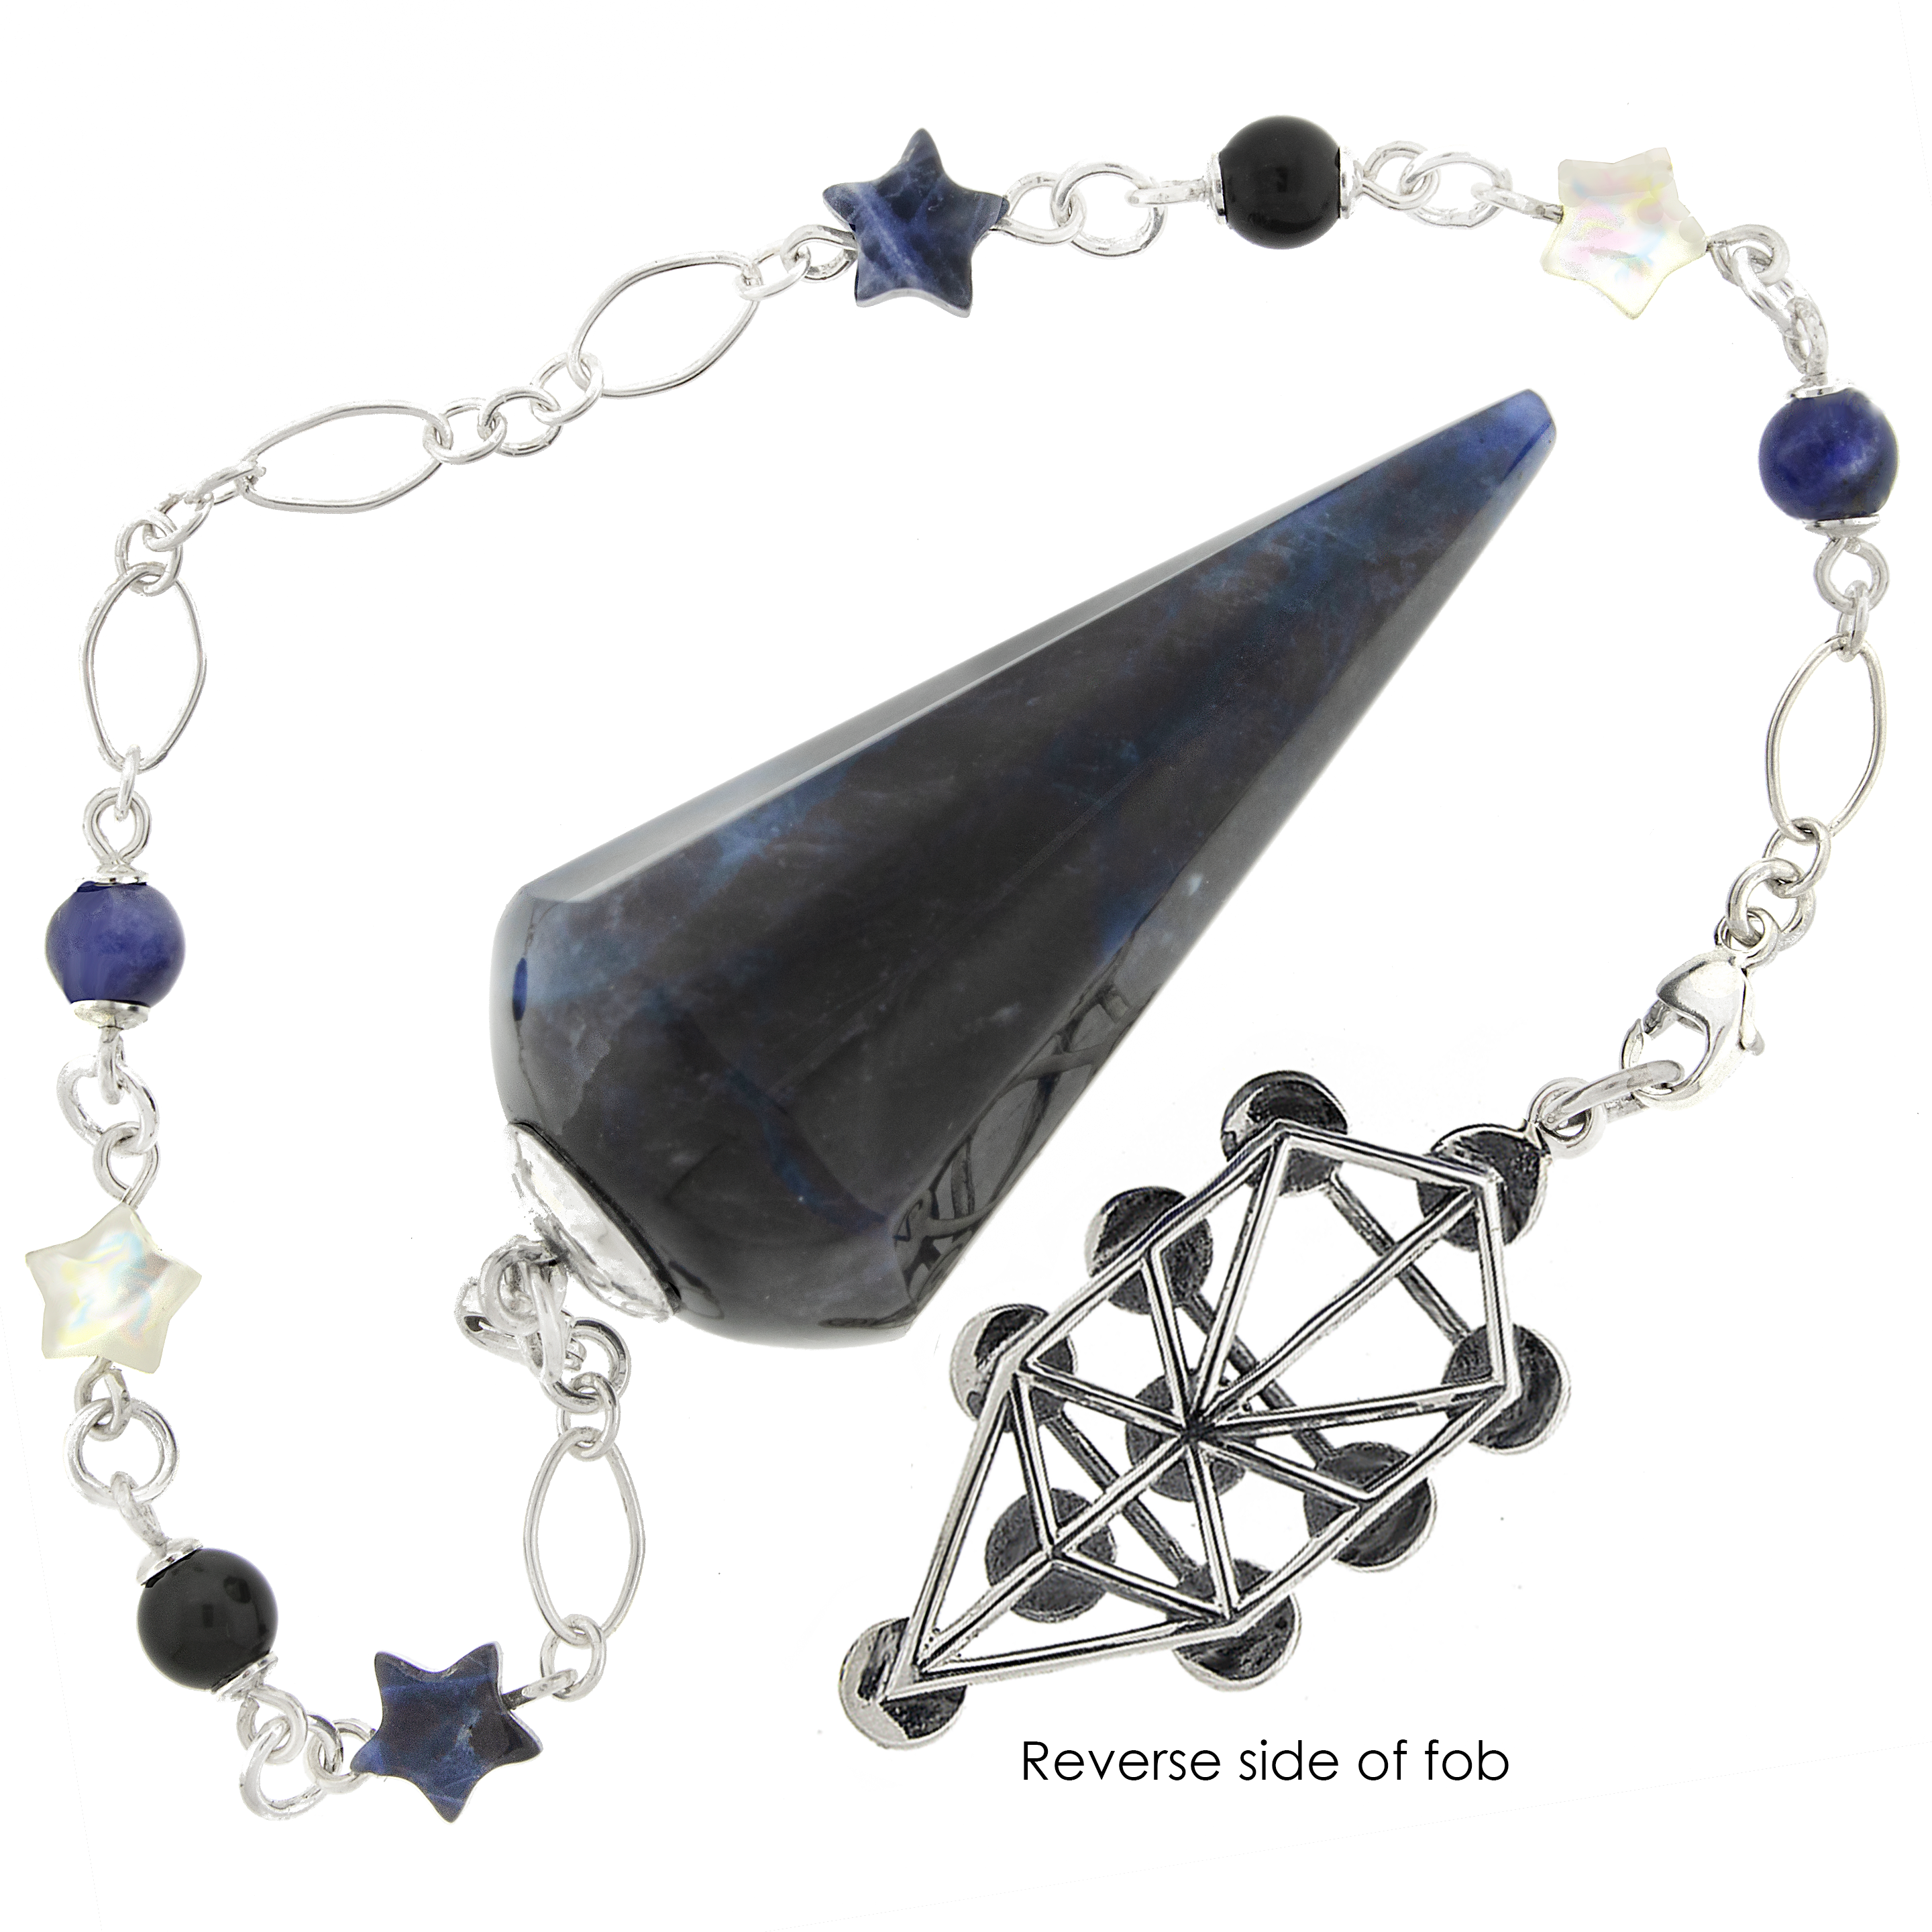 One of a Kind #355 - Sodalite, Black Obsidian, Mother-of-Pearl and Sterling Silver Pendulum by Ask Your Pendulum